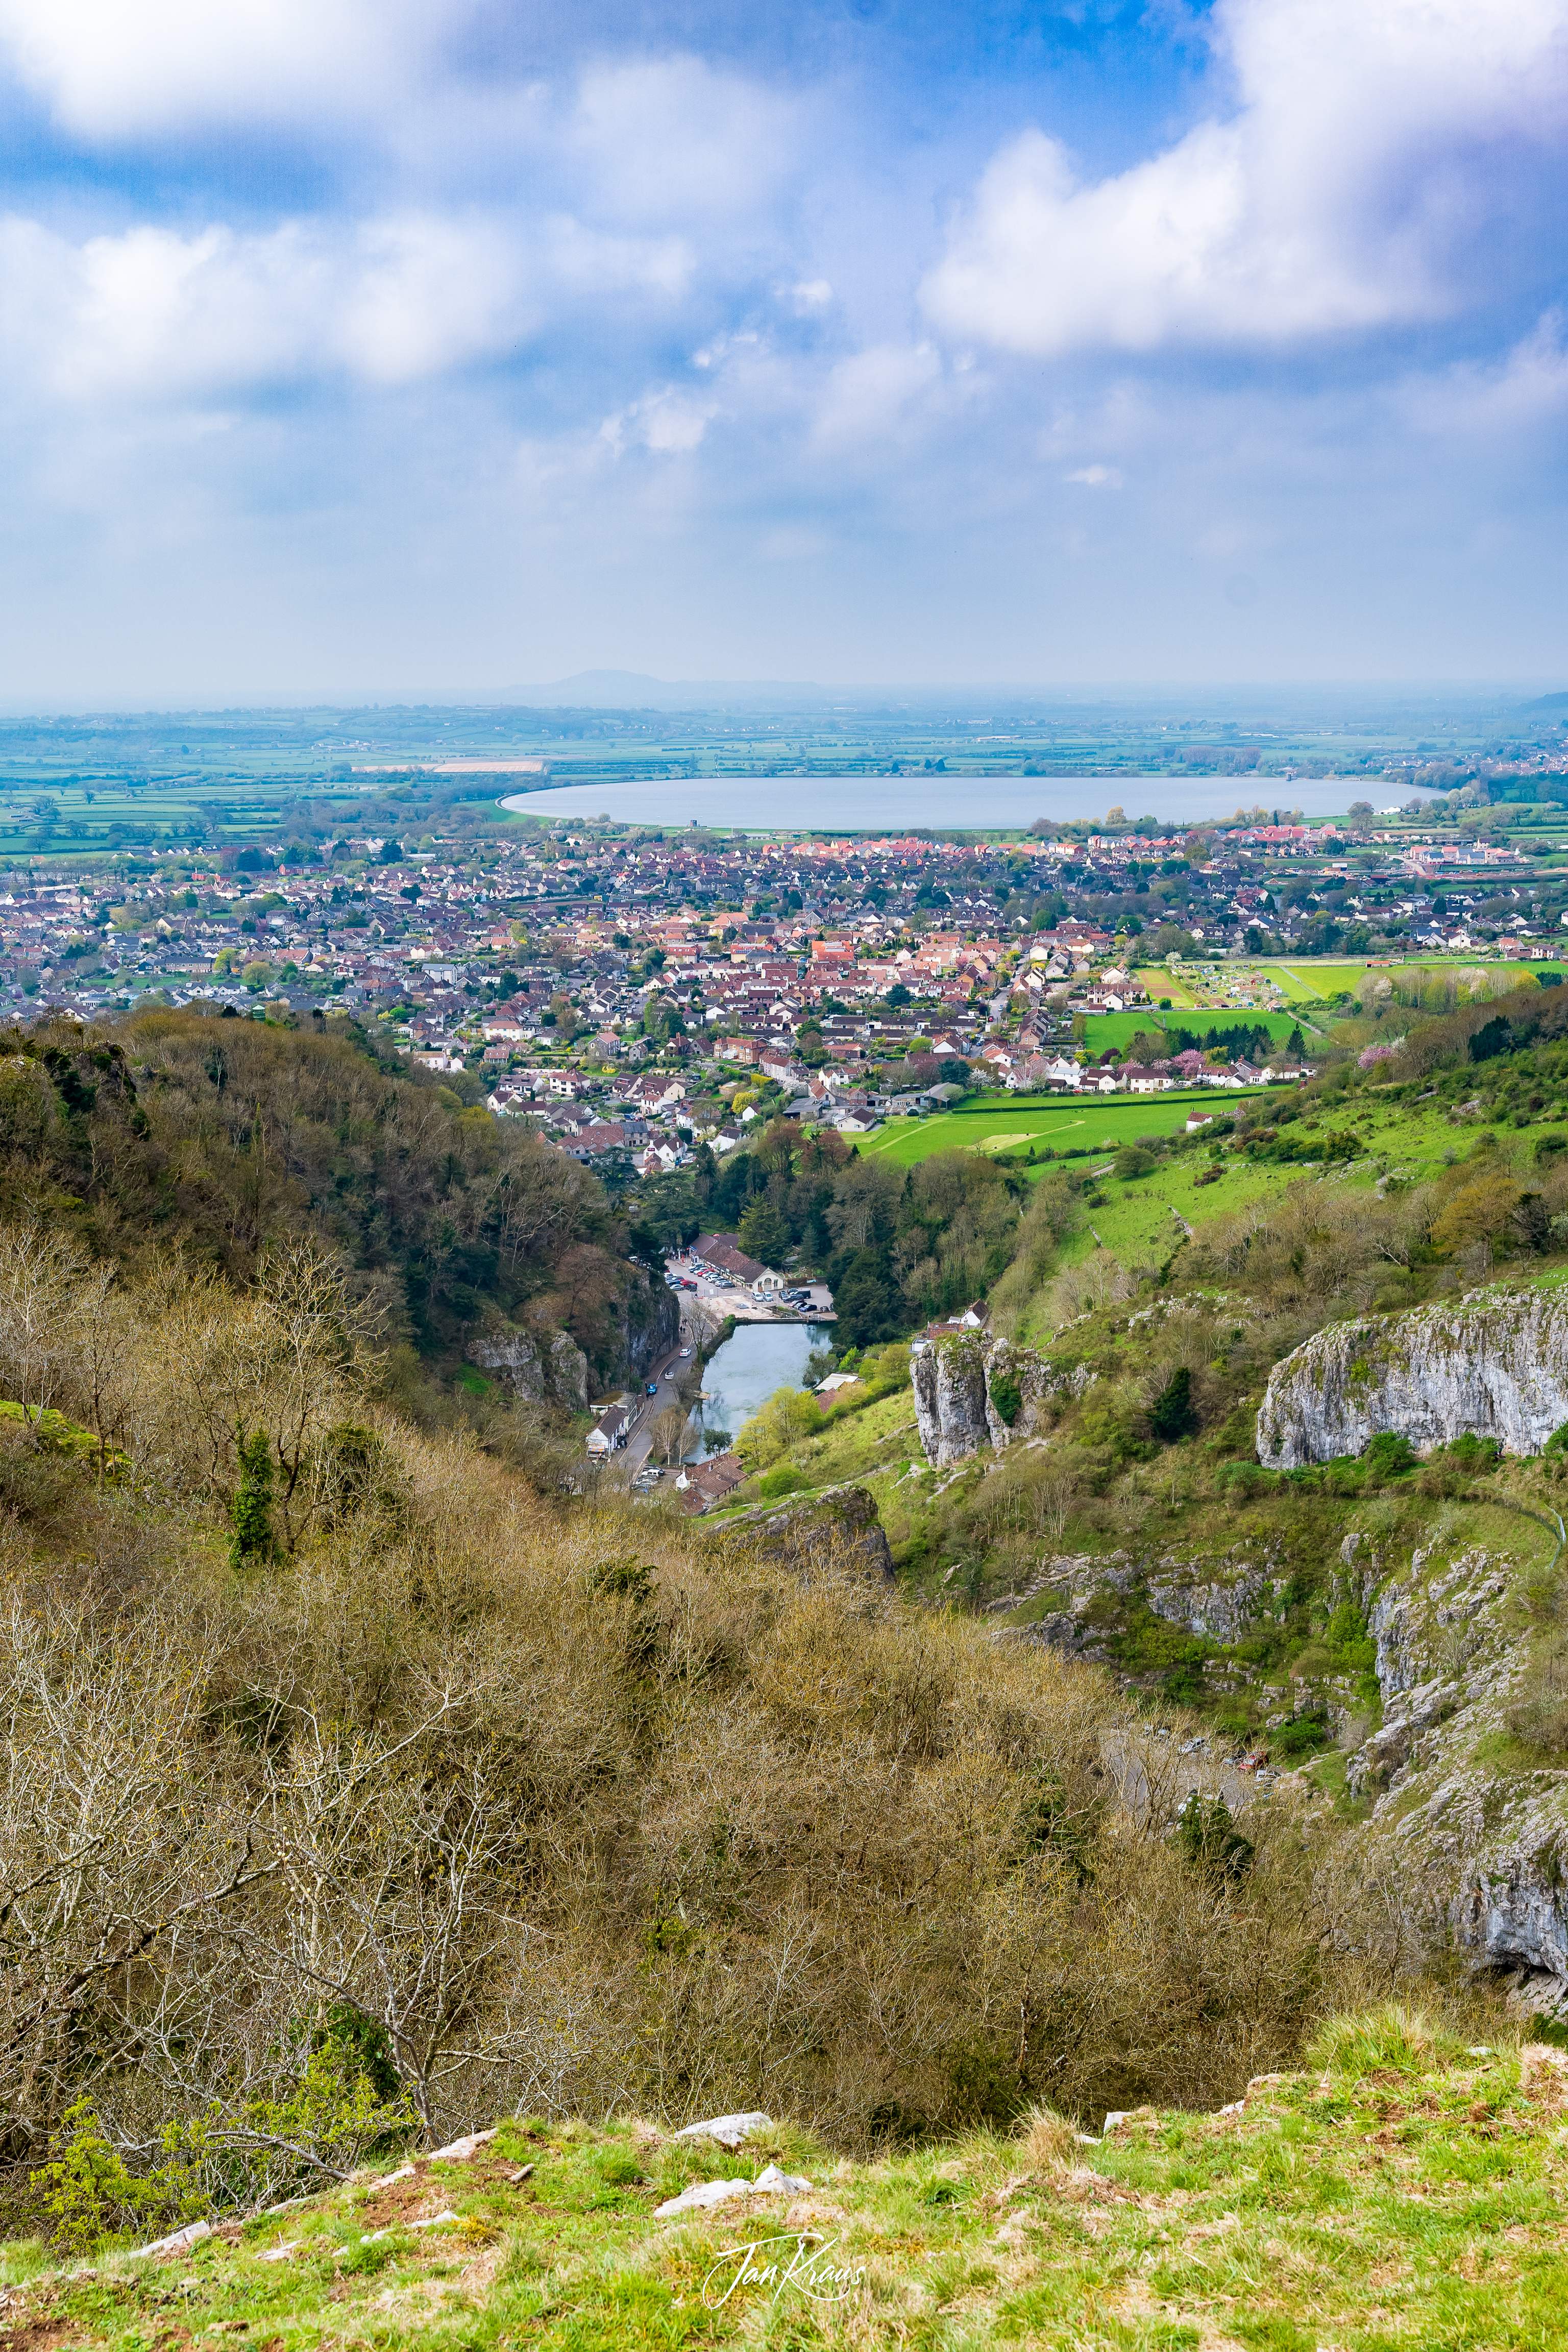 Views from the clifftops of Cheddar Gorge, facing the Cheddar Village, Somerset, England, UK